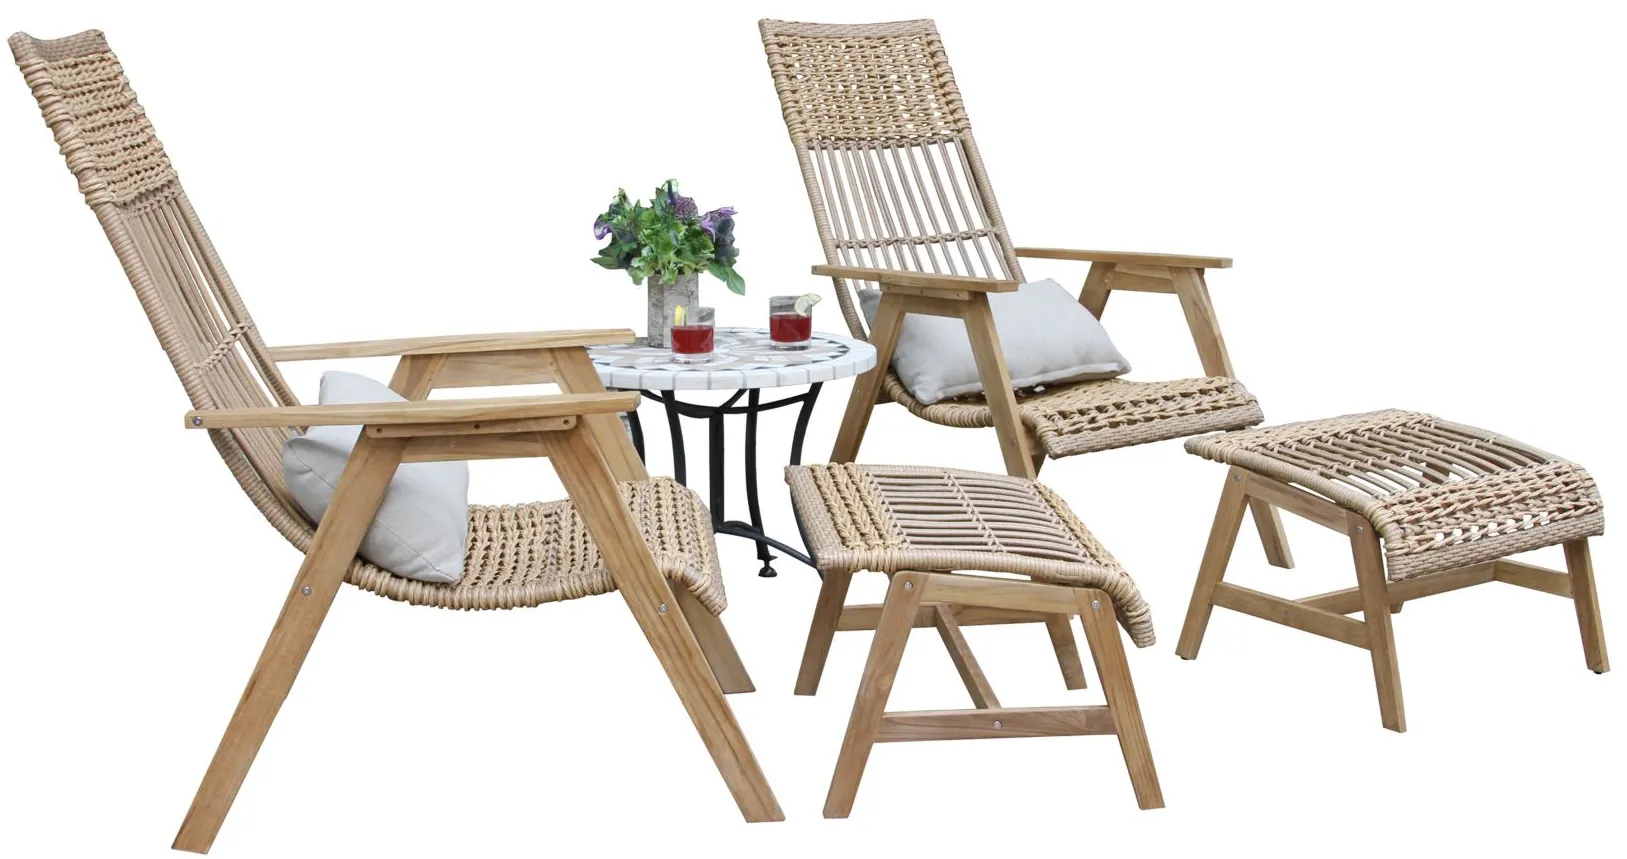 Bohemian 5 pc Lounger Set with Ottomans in Teak by Outdoor Interiors